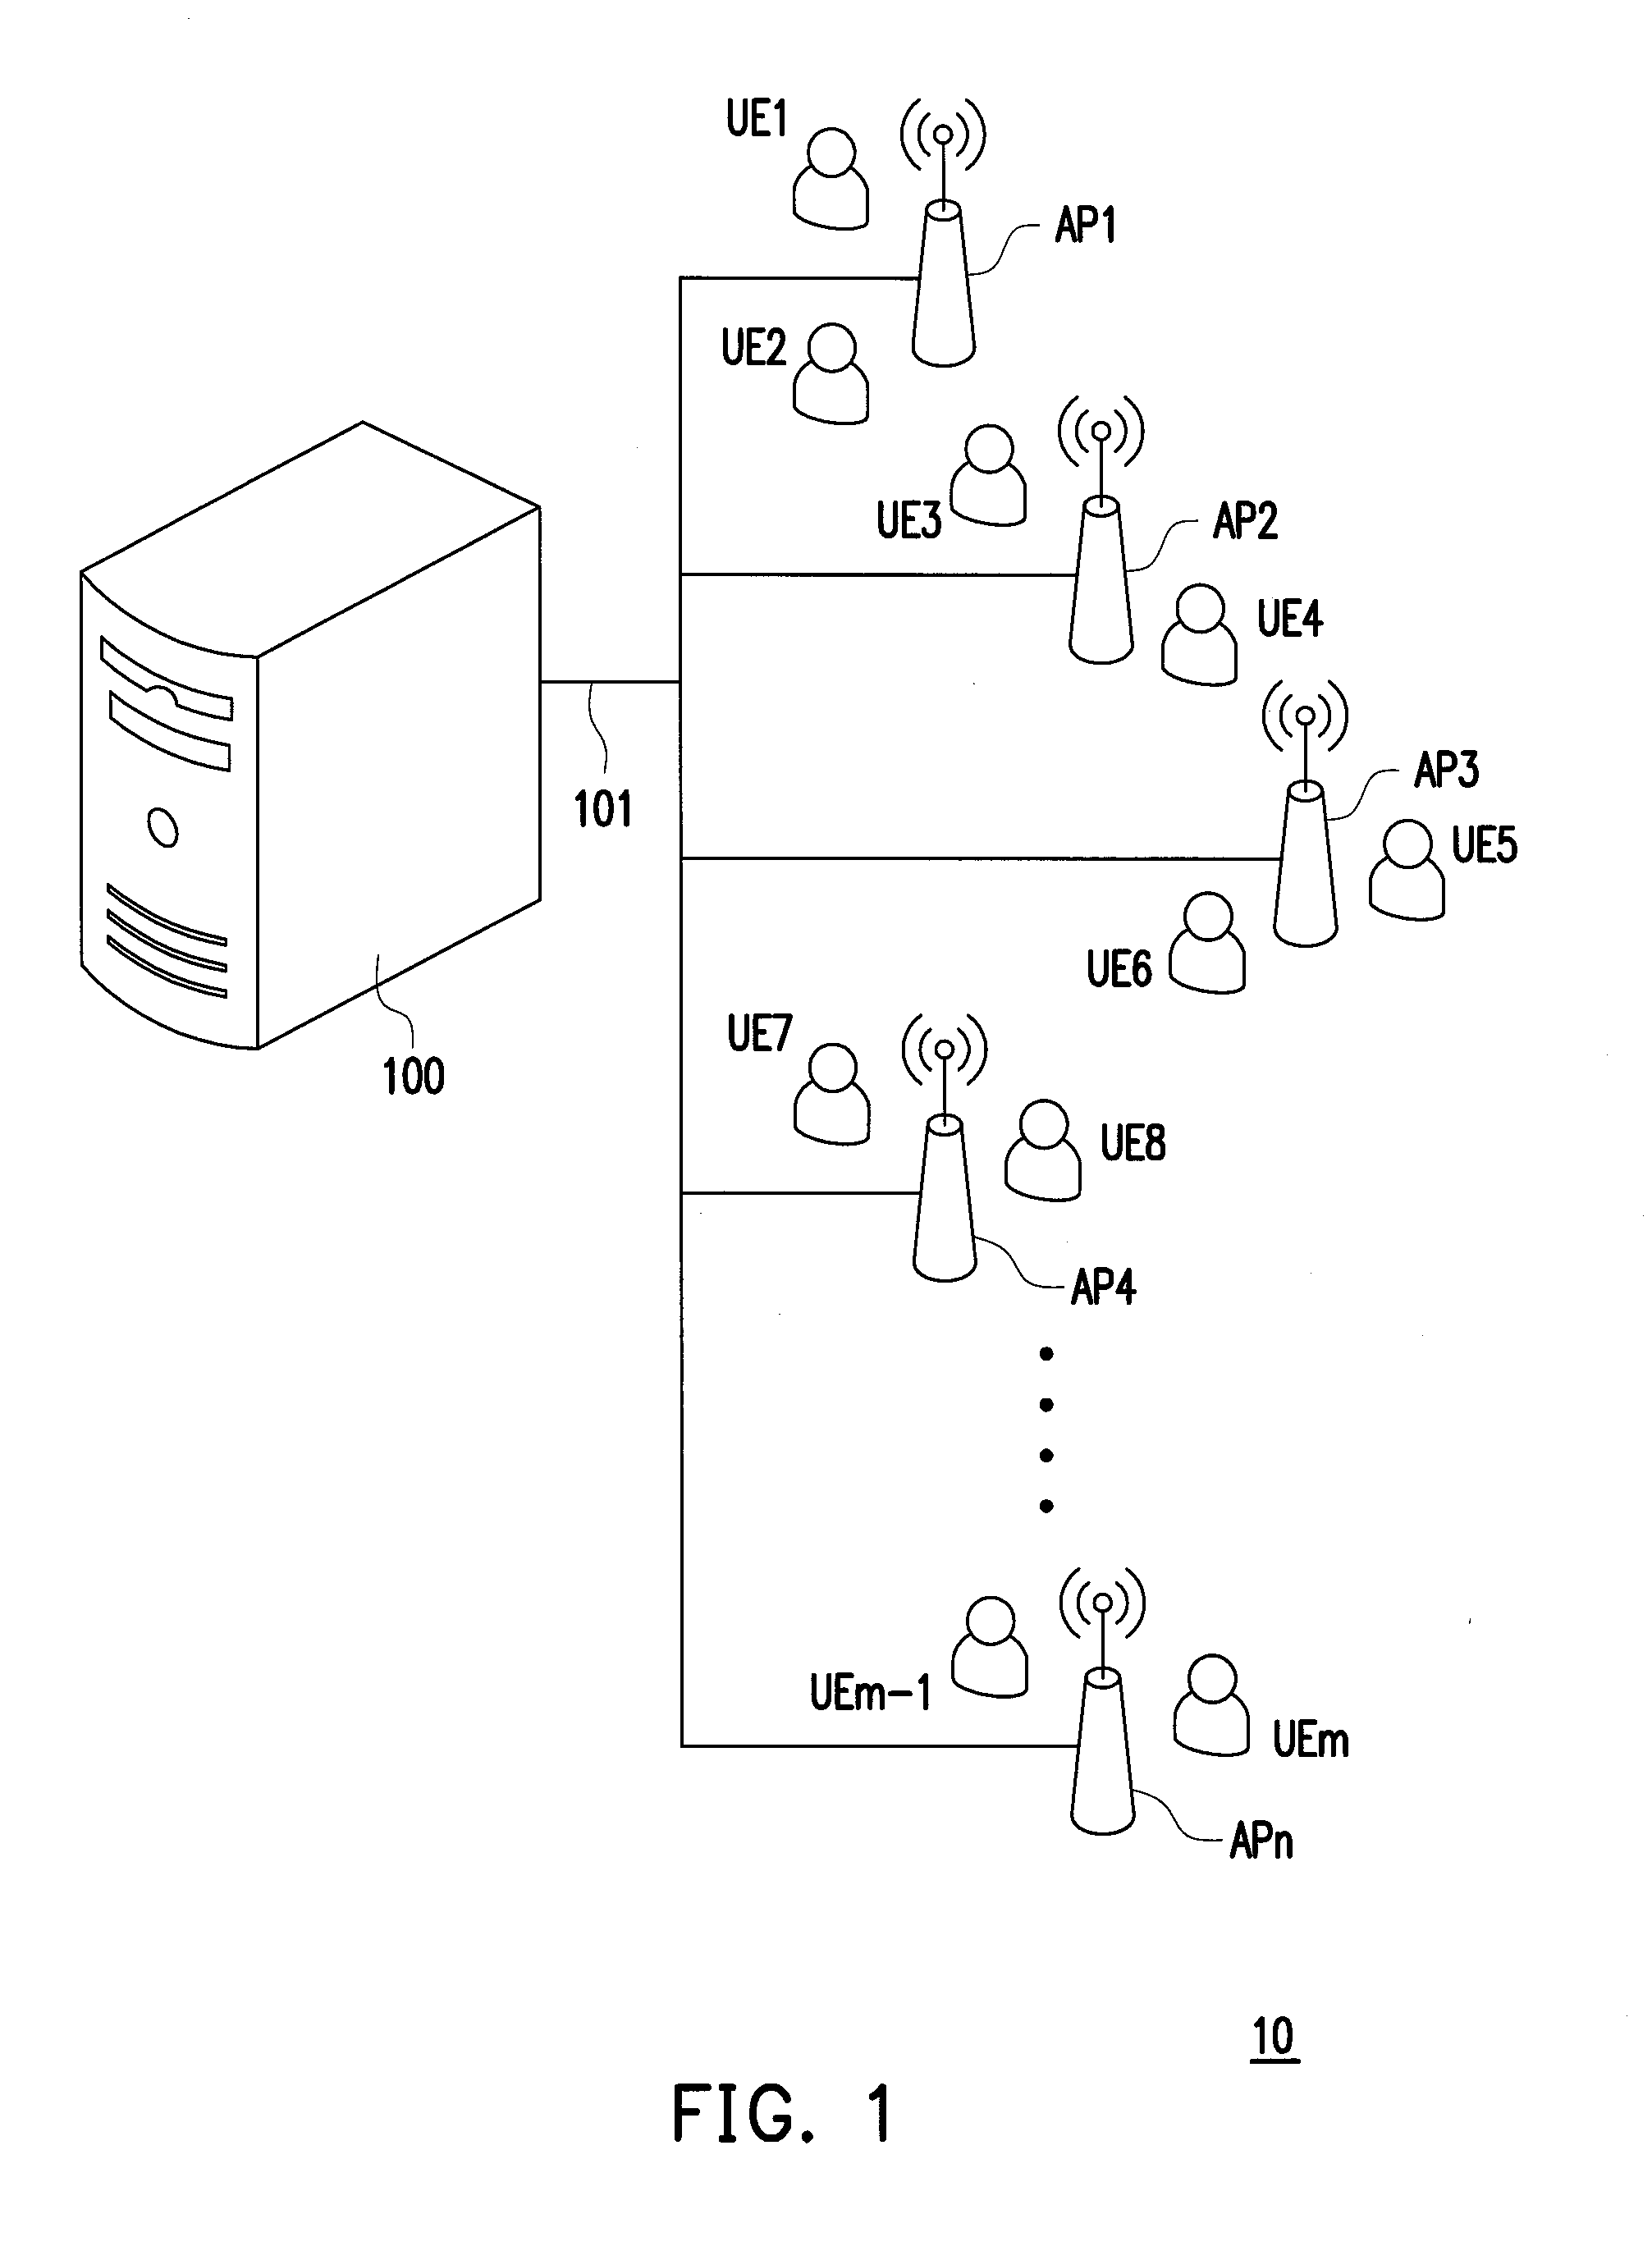 Access point and communication system for resource allocation